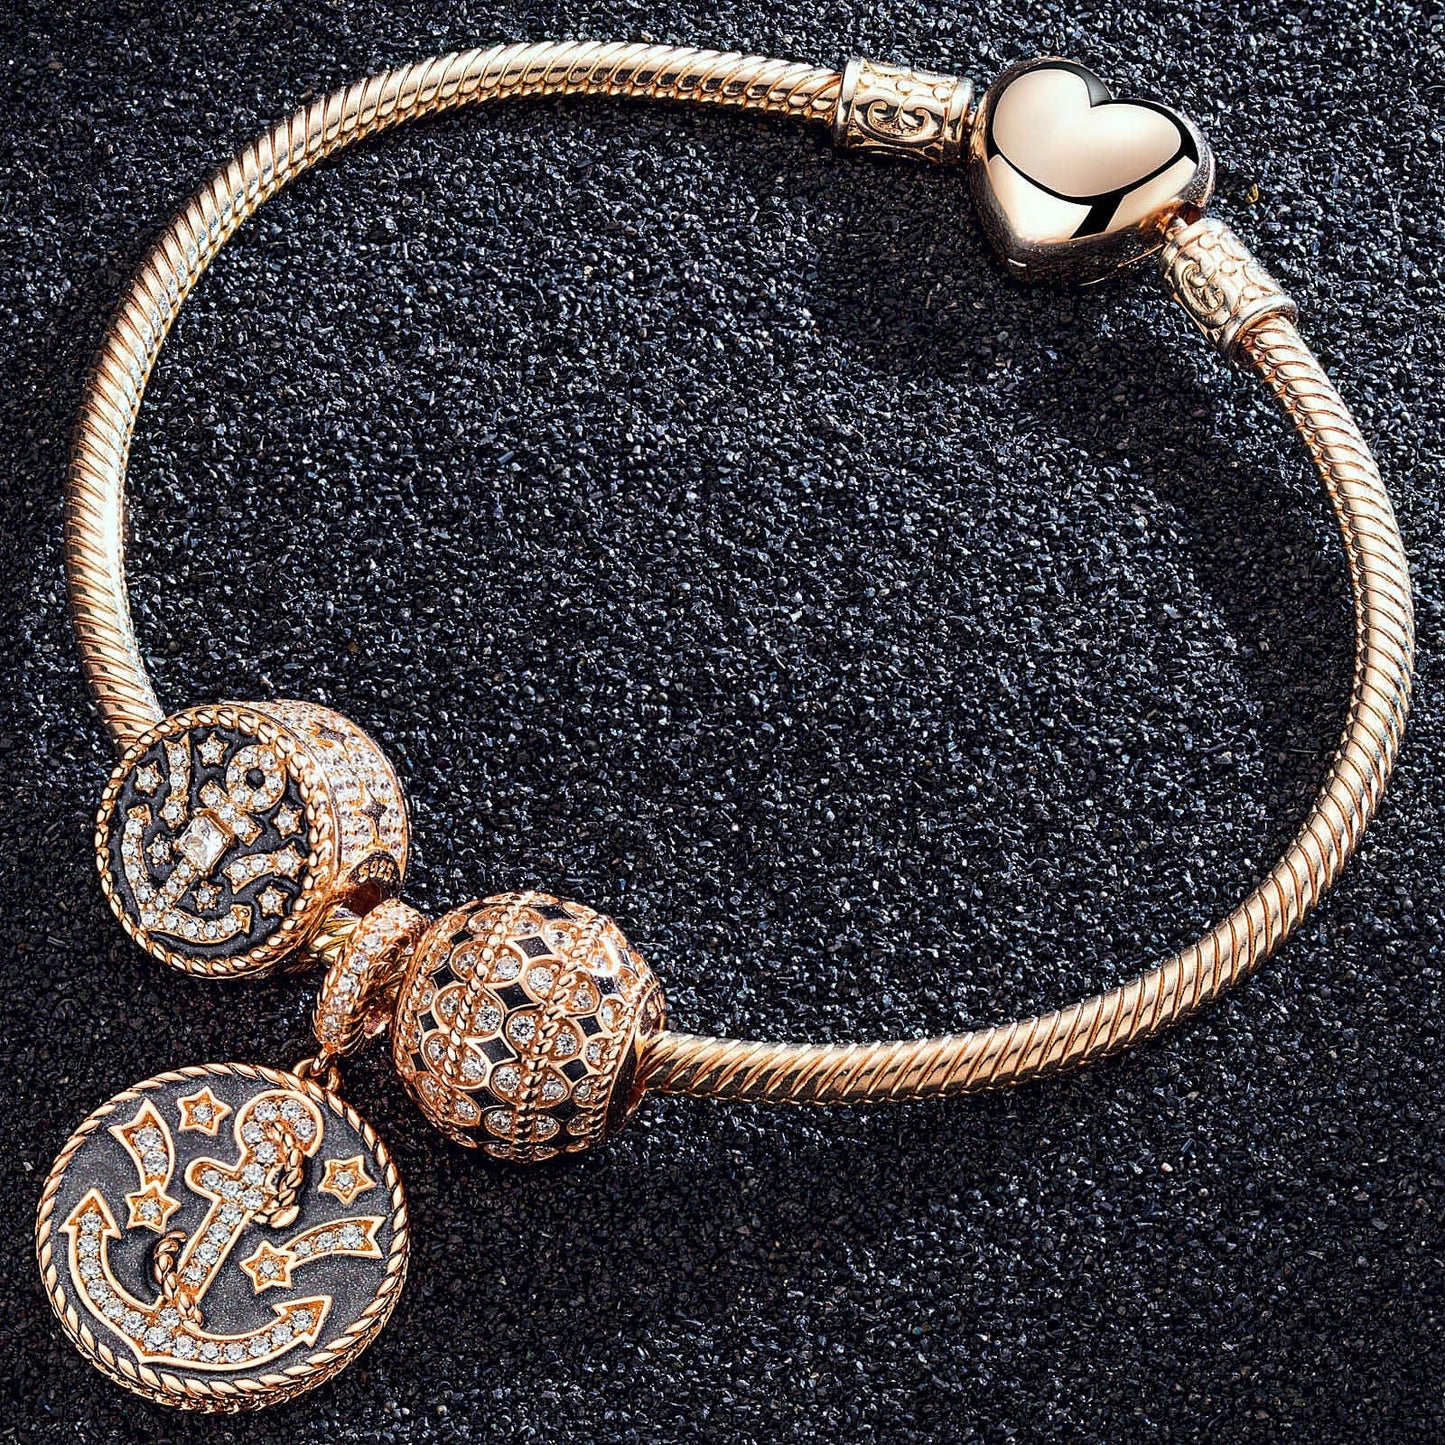 Stars of the Voyage Tarnish-resistant Silver Snake Chain Charms Bracelet Set With Enamel In Rose Gold Plated